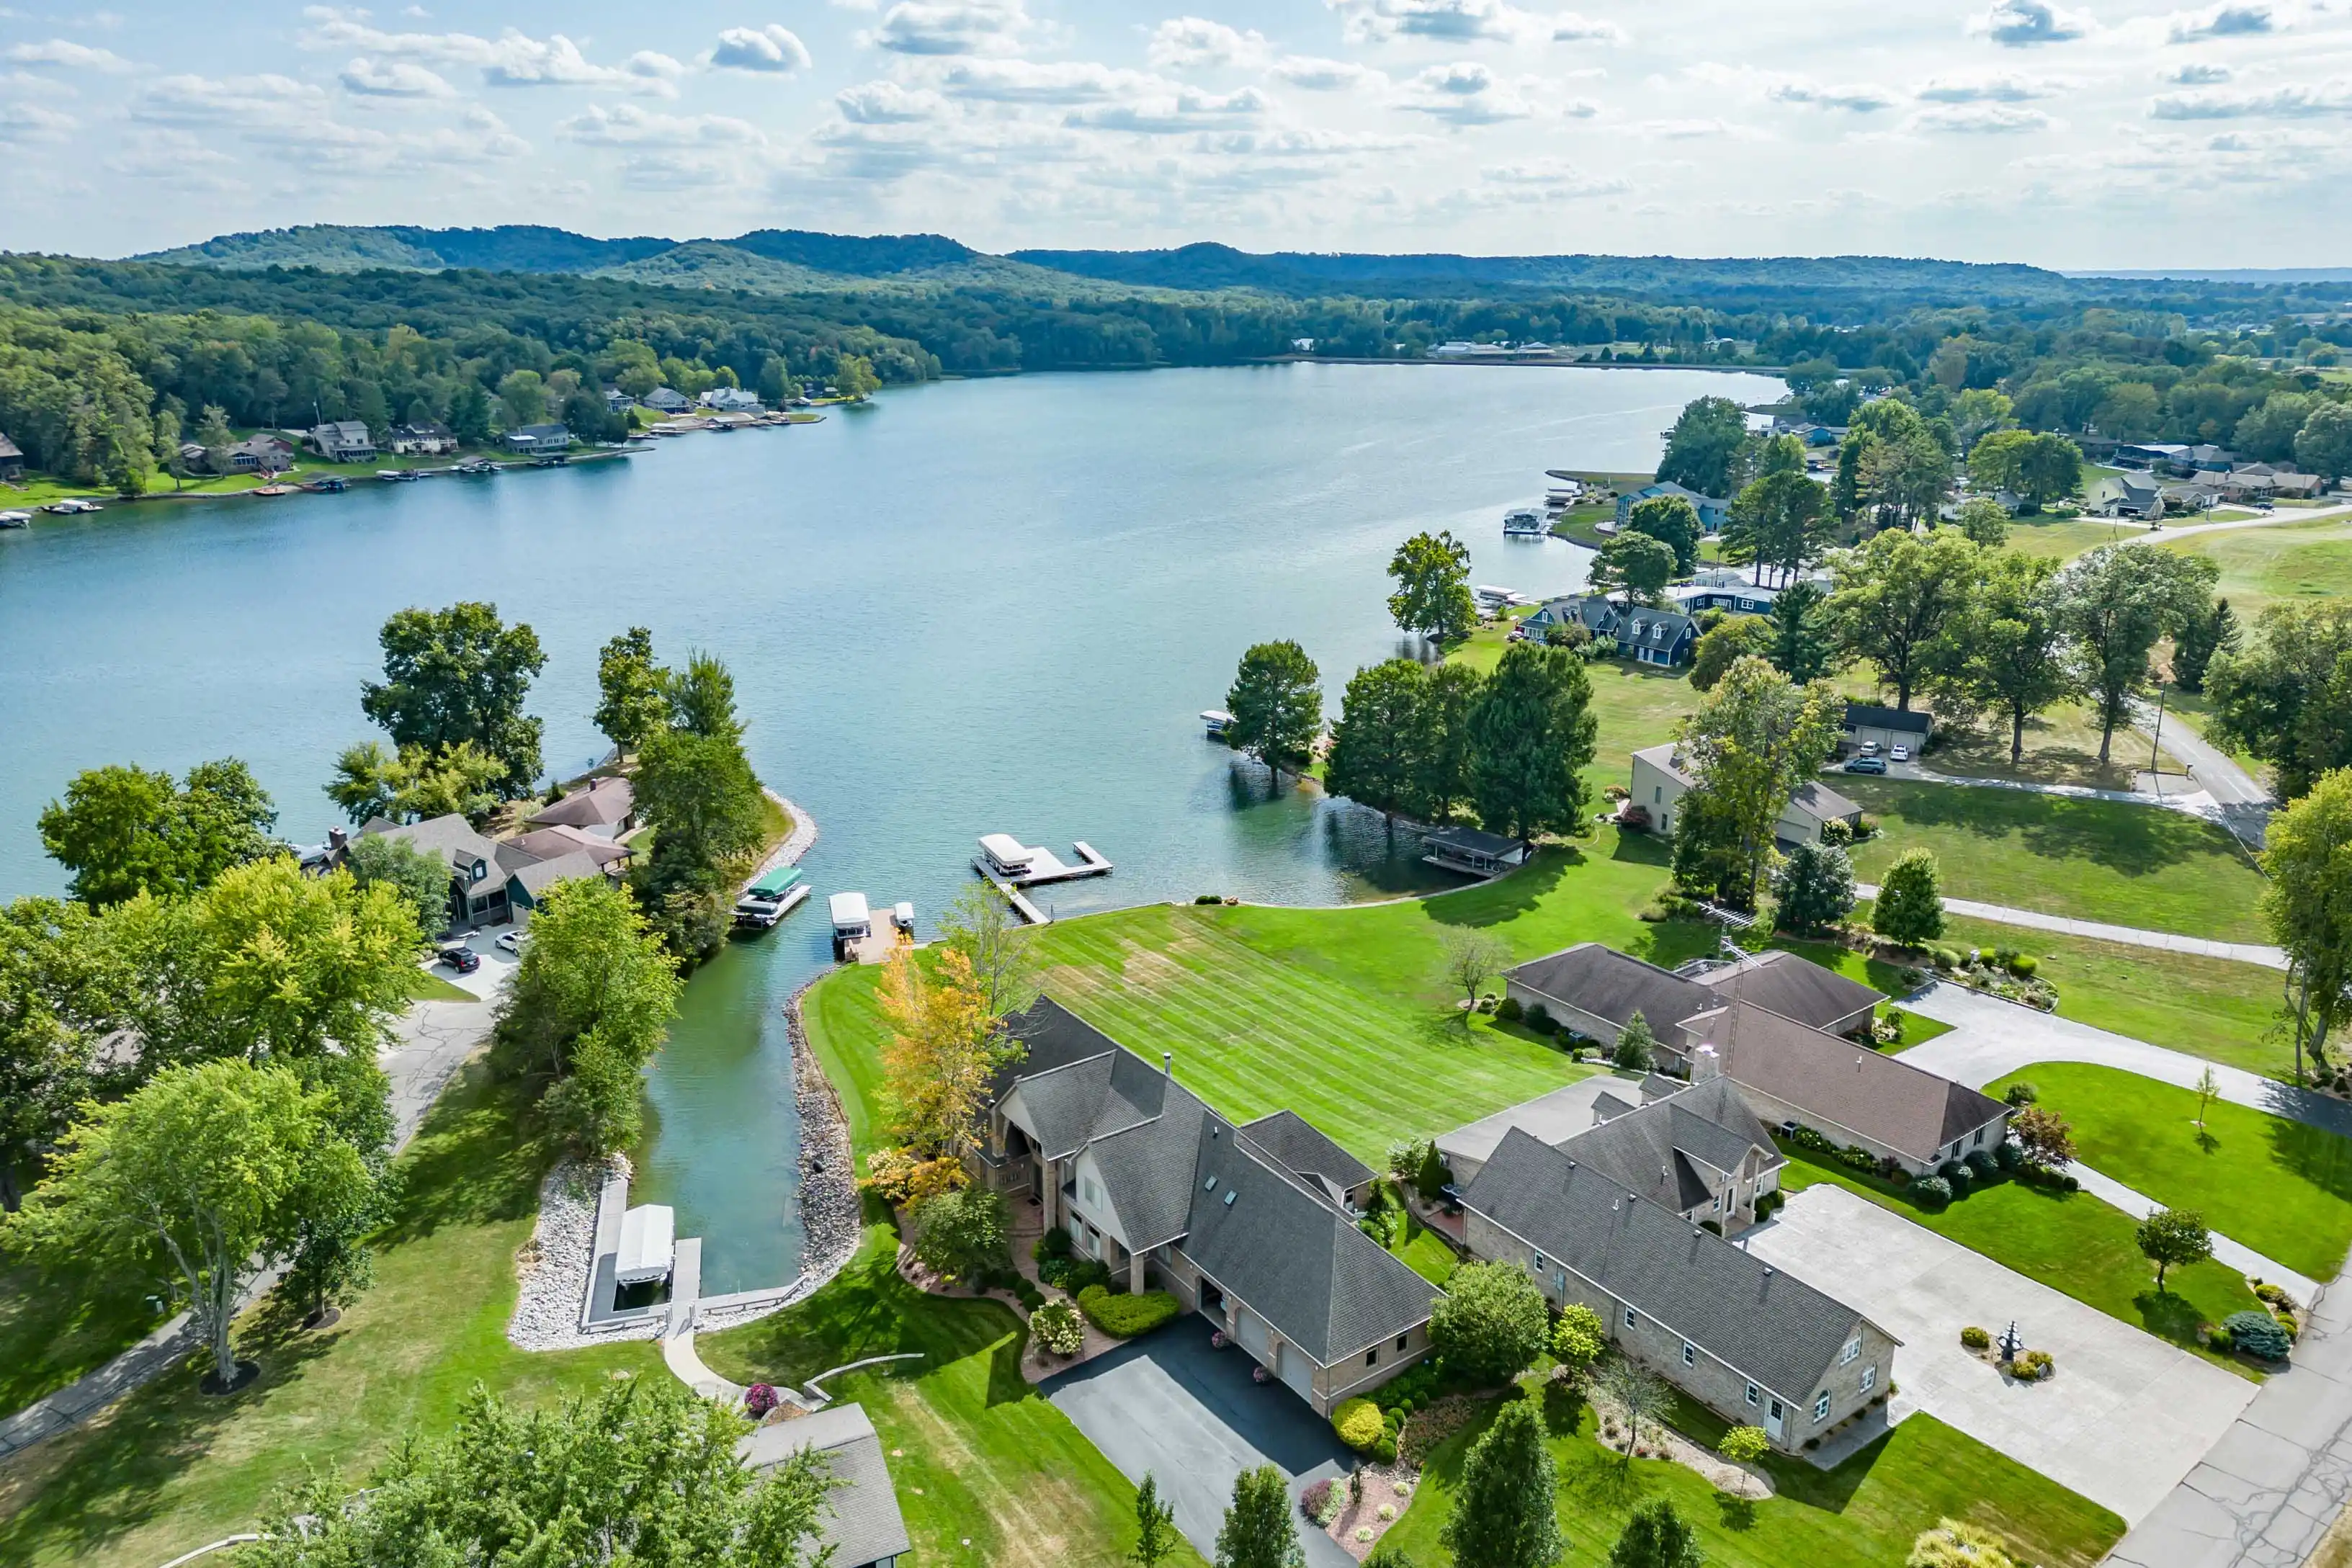 Aerial view of a residential area with houses, lush green lawns, and docks along the edge of a serene lake.